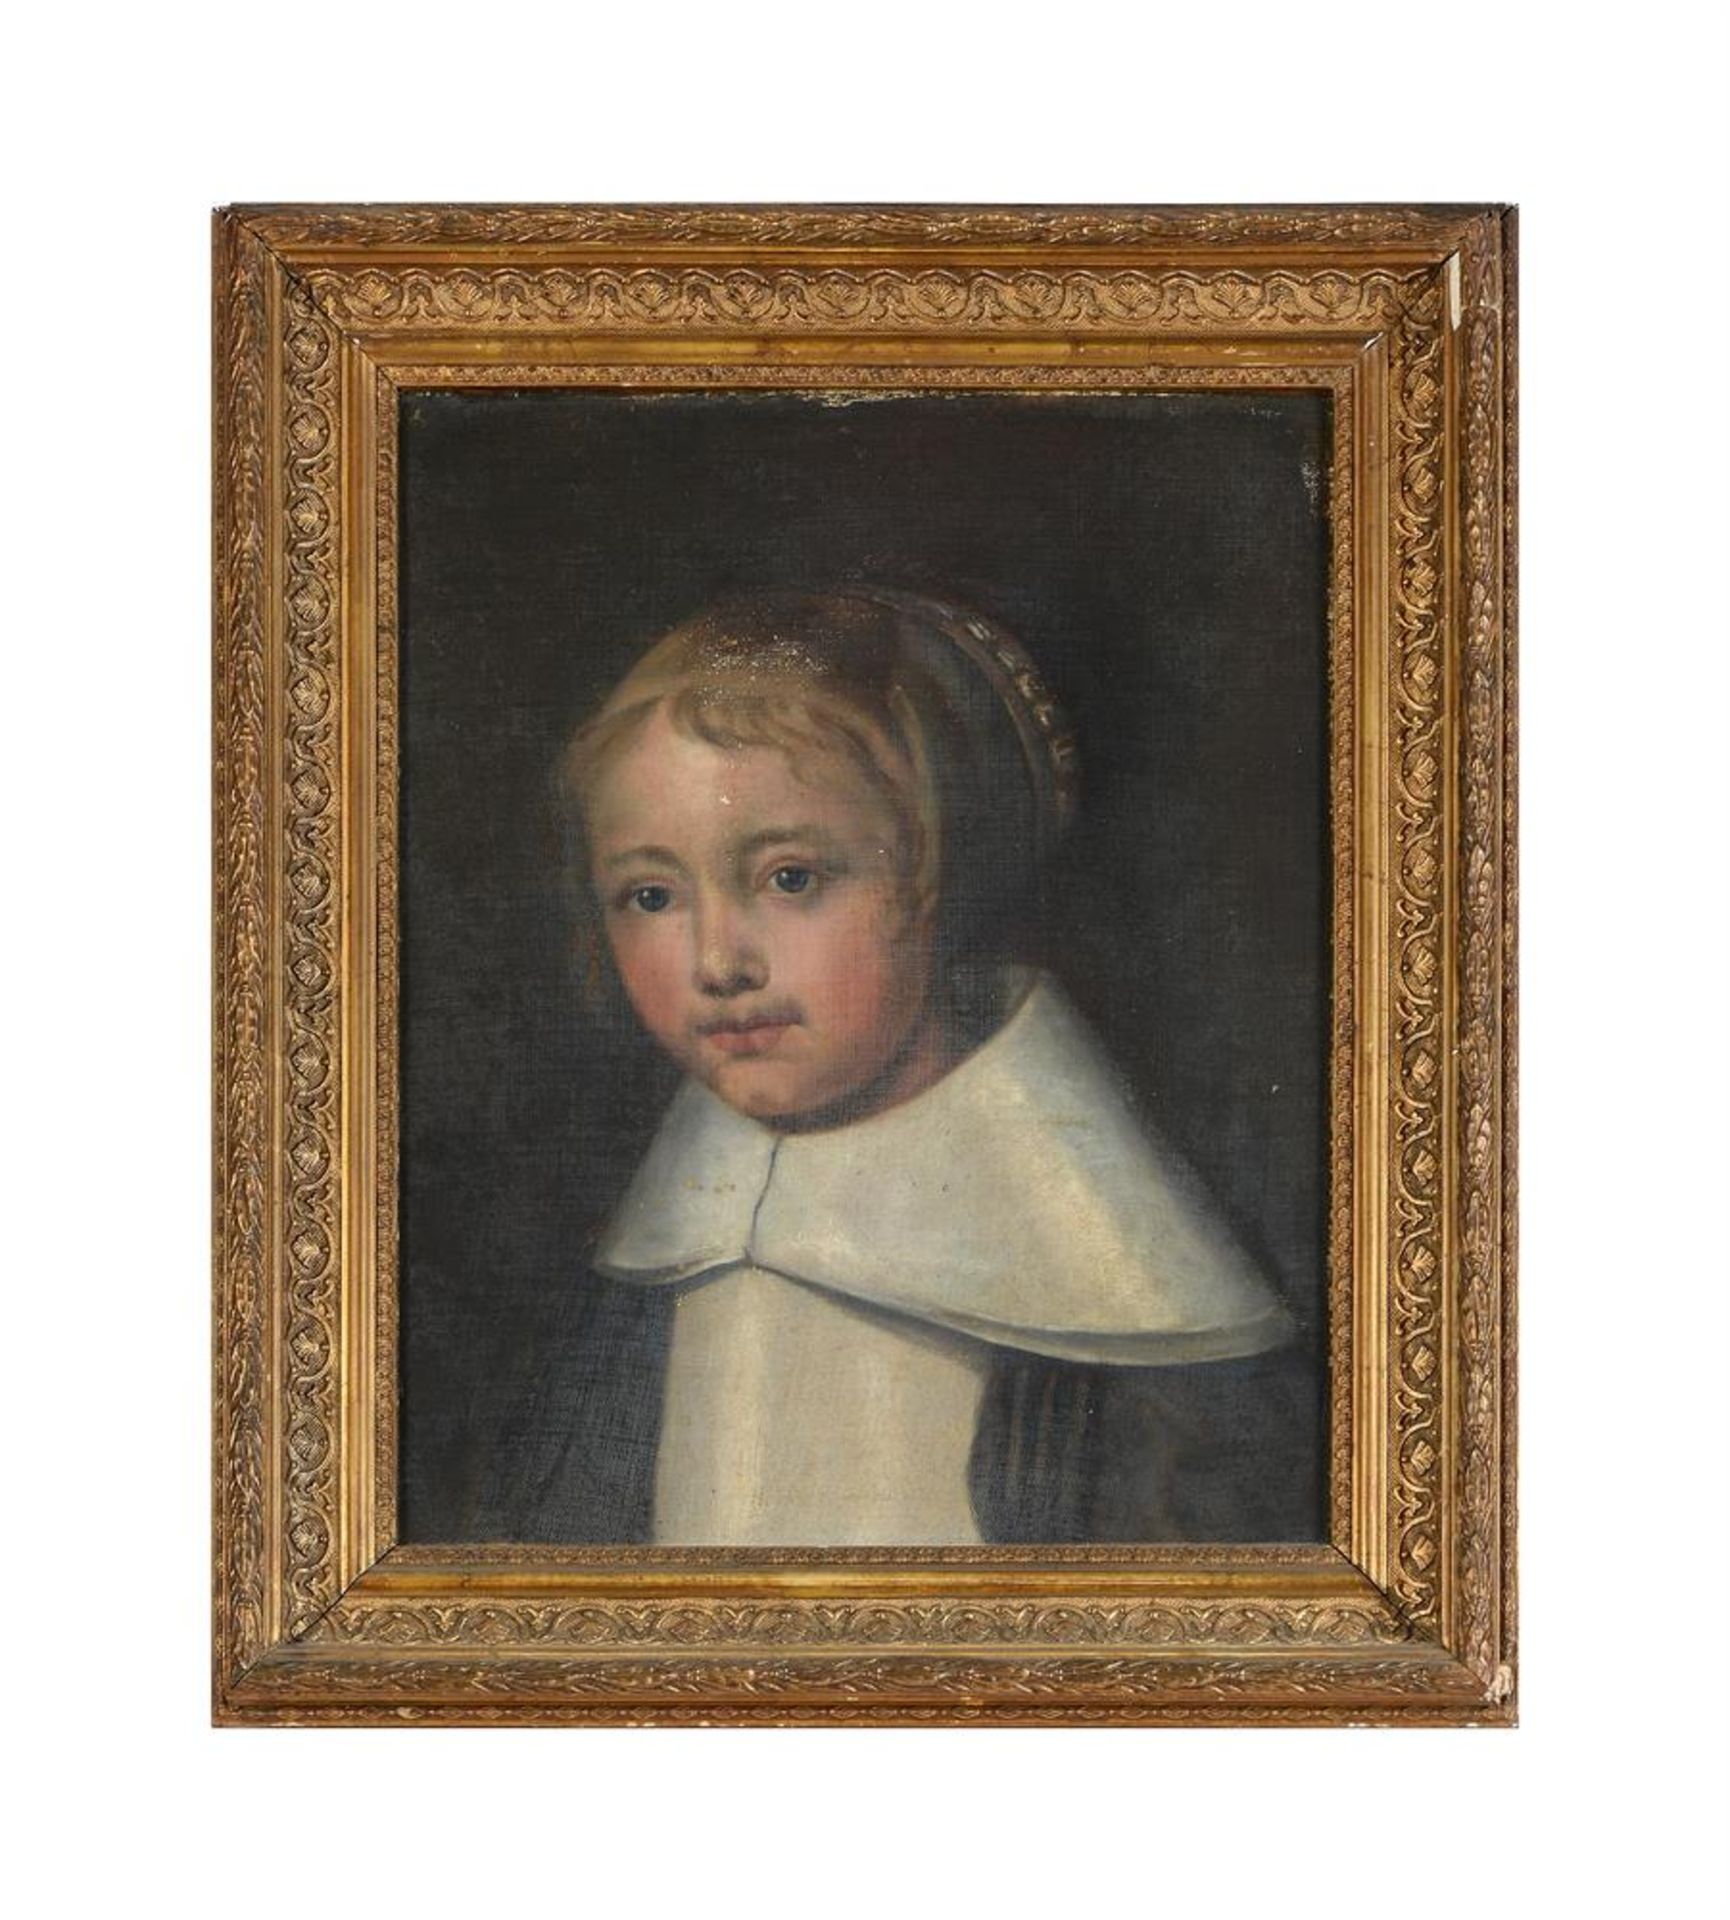 DUTCH SCHOOL (LATE 19TH CENTURY), A STUDY OF A YOUNG GIRL IN 17TH CENTURY COSTUME - Image 2 of 2